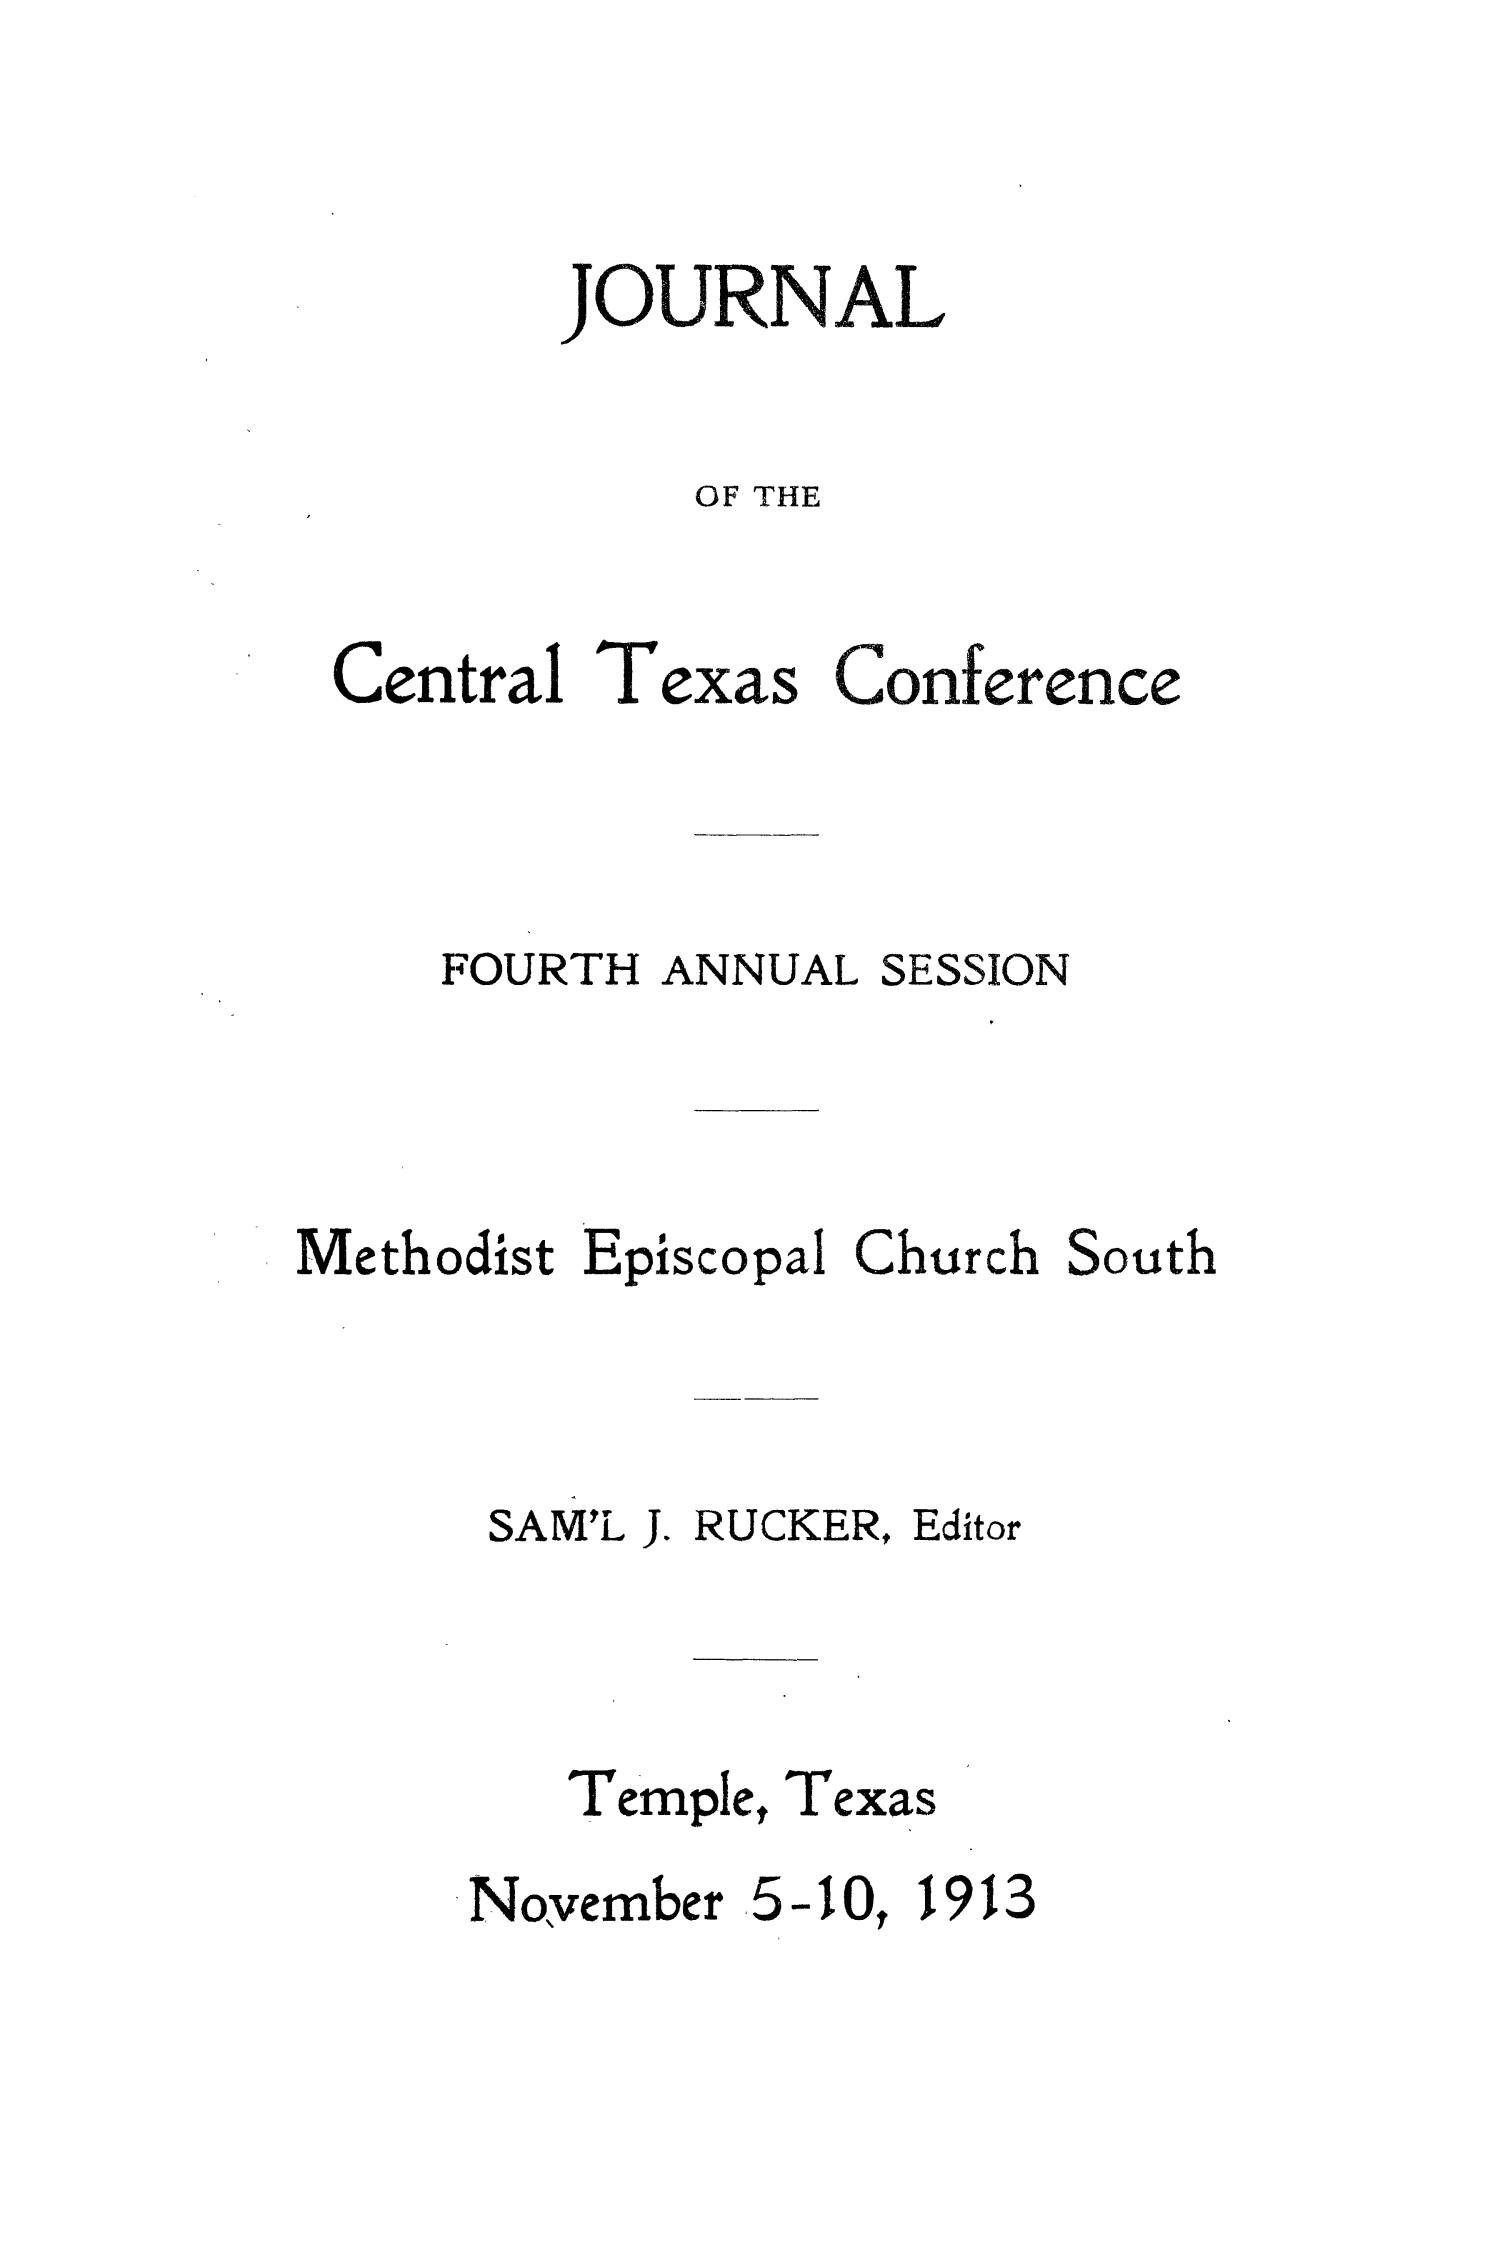 Journal of the Central Texas Conference, Fourth Annual Session, Methodist Episcopal Church South
                                                
                                                    1
                                                